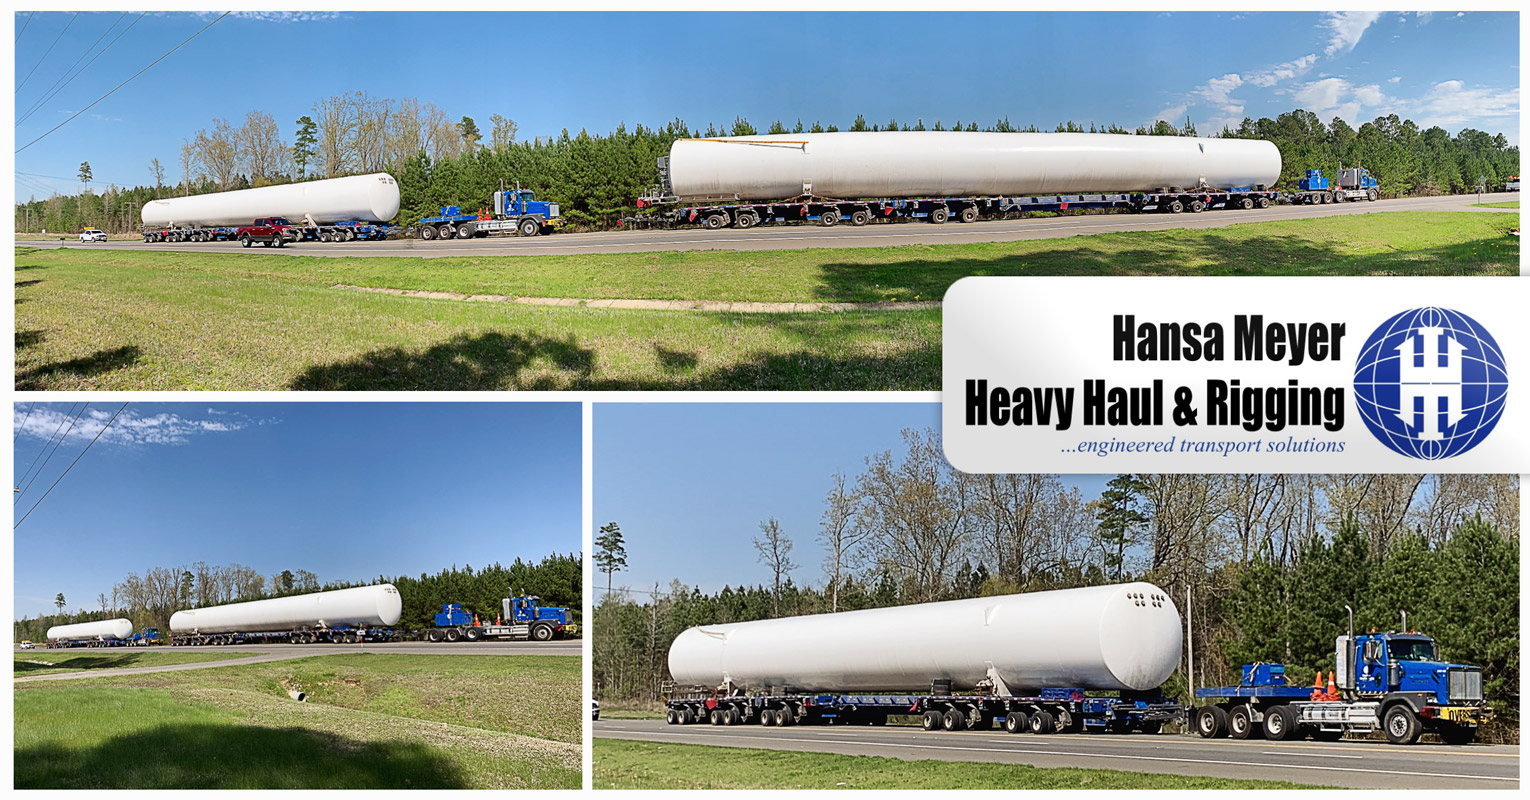 Hansa Meyer Transported 189'L x 18'W x 17'-5"H Tanks in Tandem from the Midwest to Florida